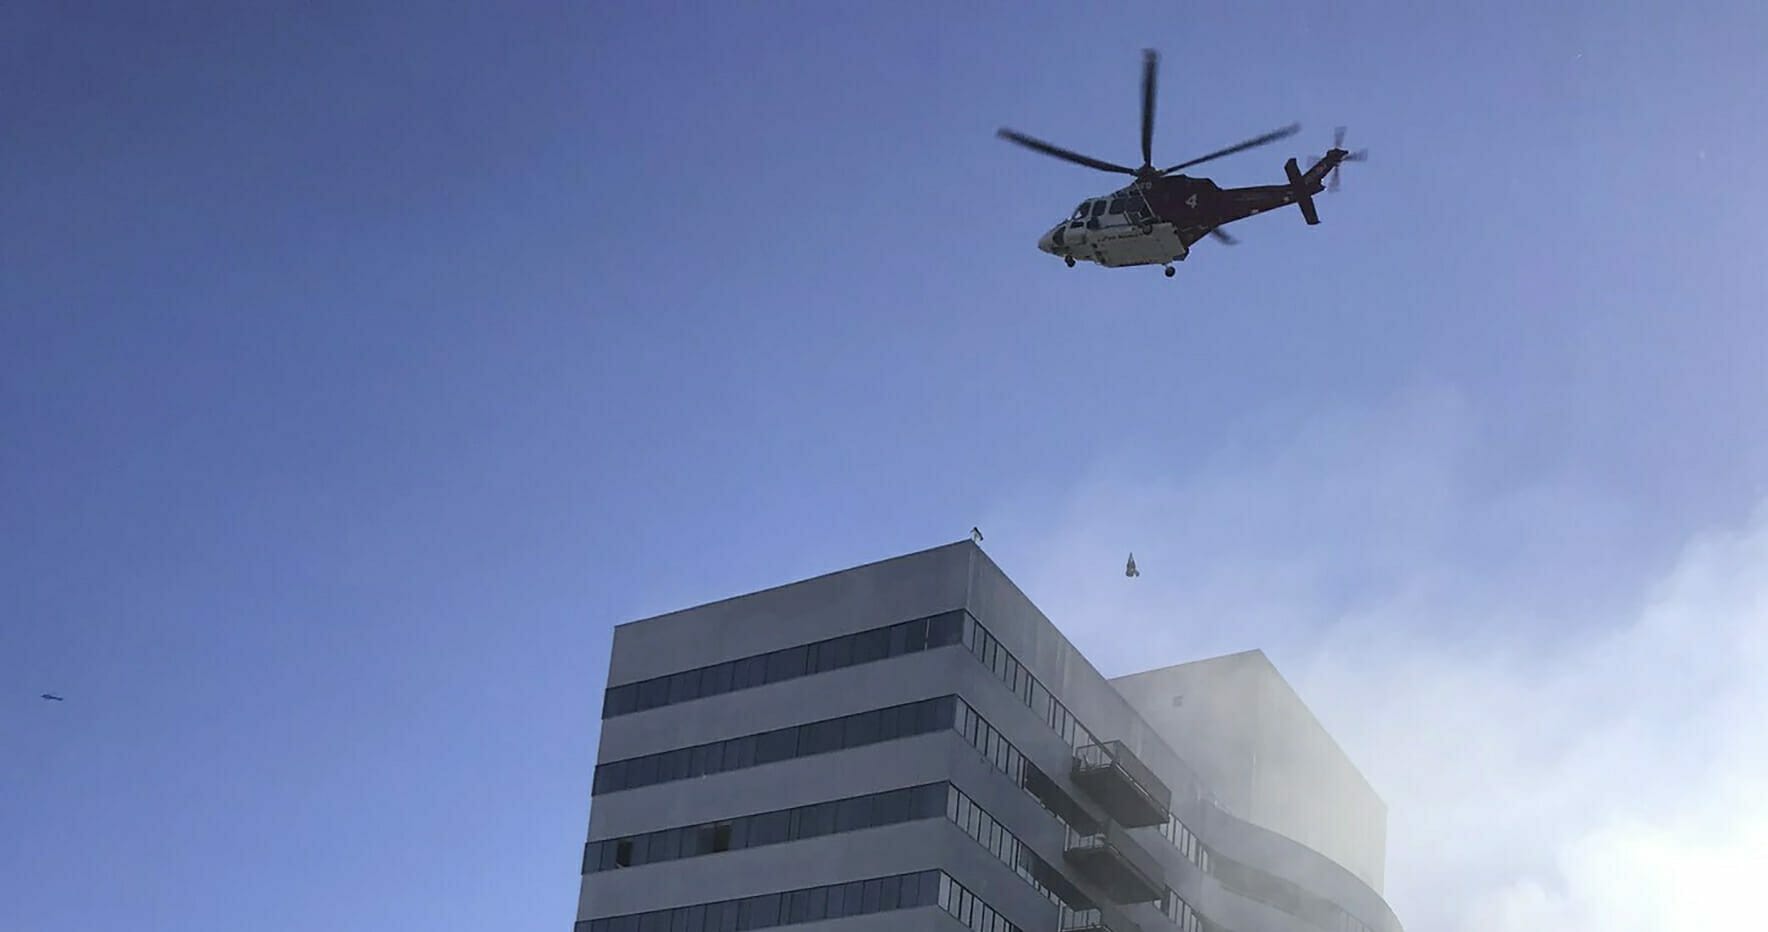 A helicopter flies over a residential building on fire in Los Angeles on Jan. 29, 2020.